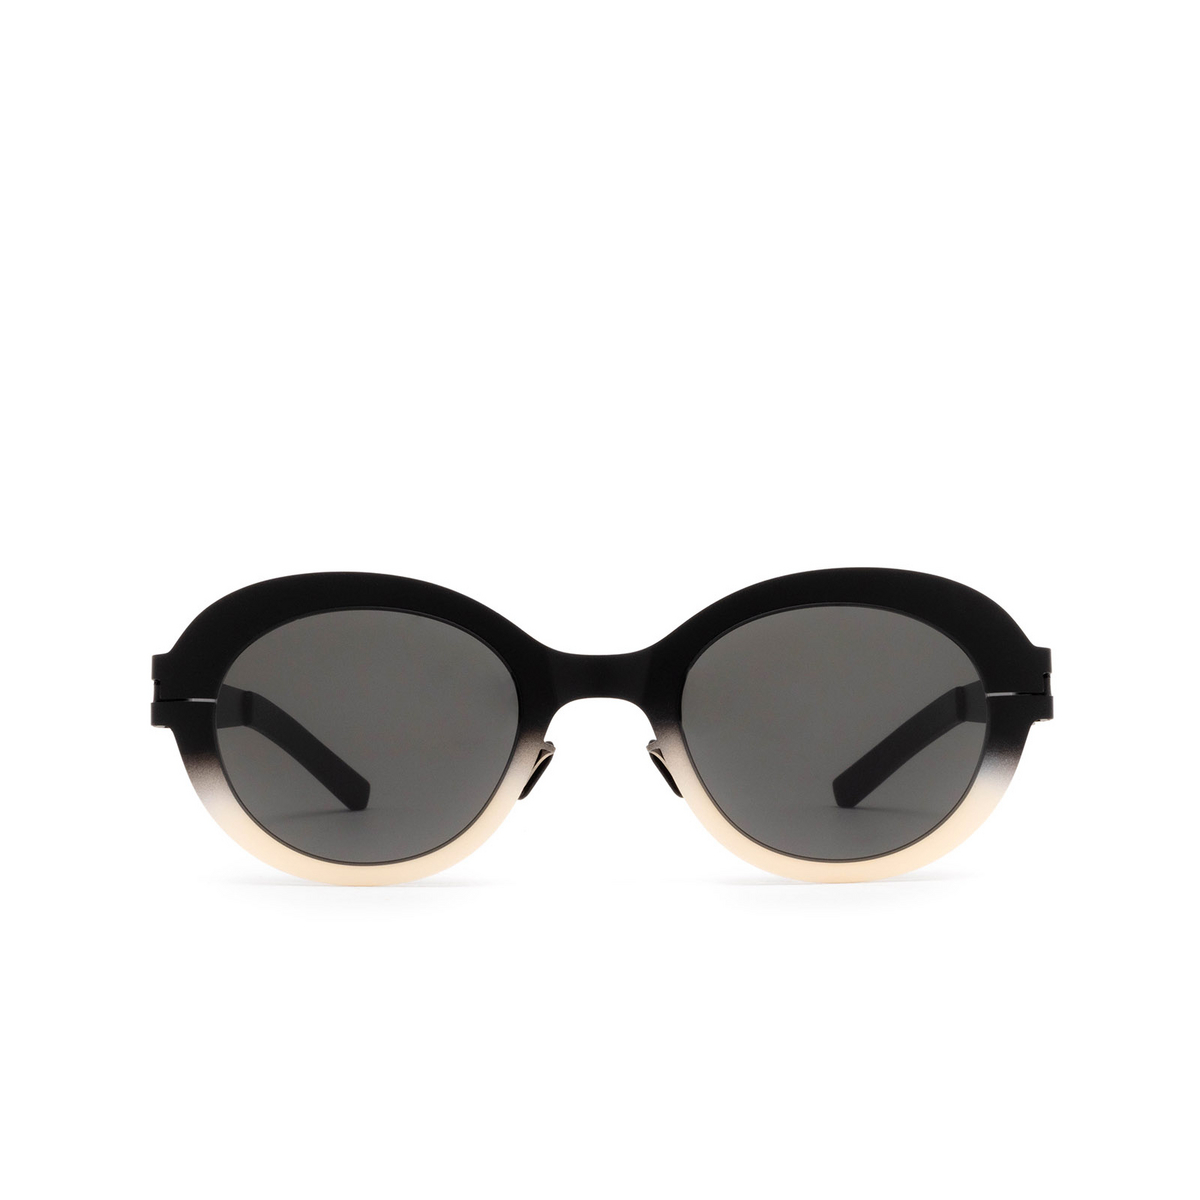 Mykita® Oval Sunglasses: Focus color 476 Black/chantilly White - front view